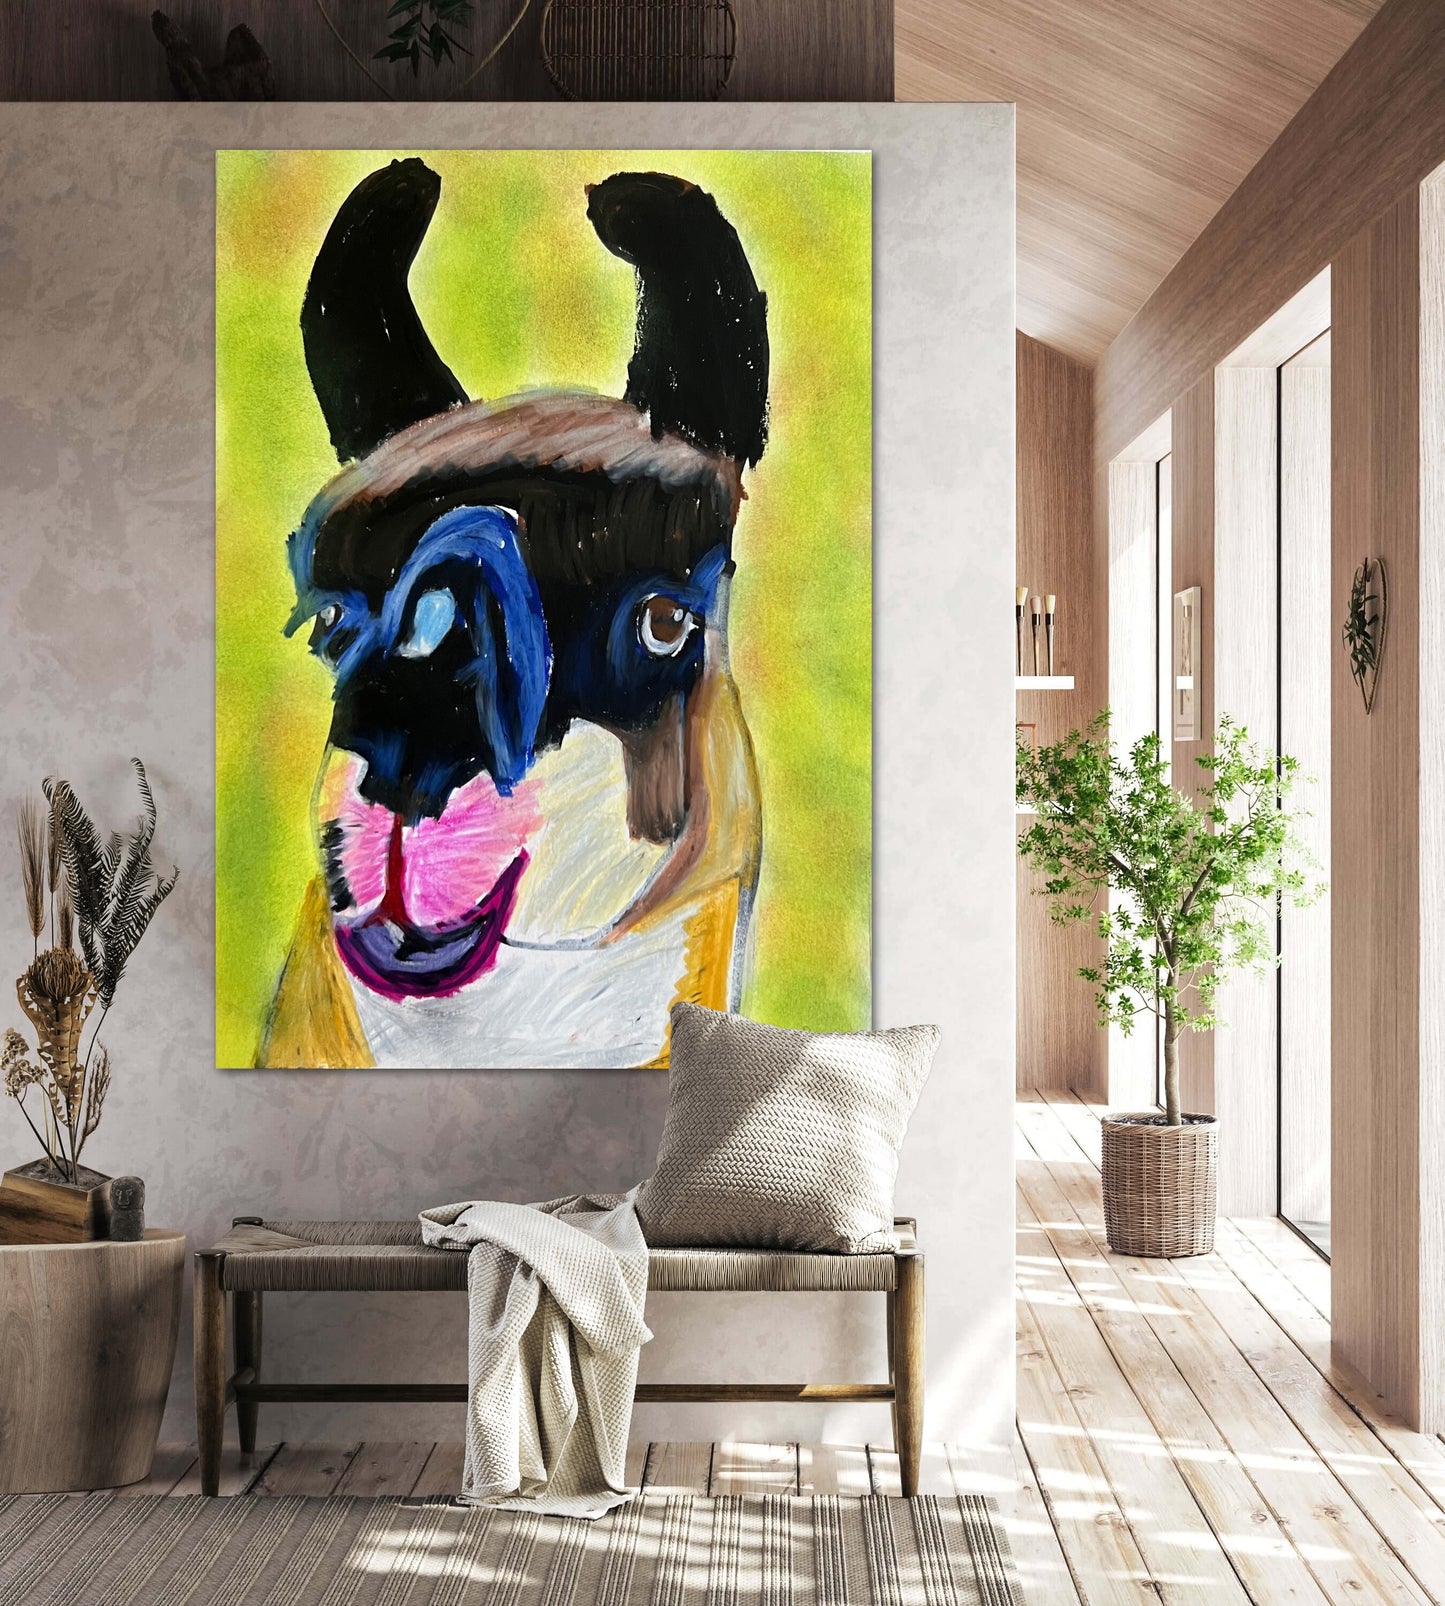 The Llama - Print, Poster or Stretched Canvas Print in more sizes